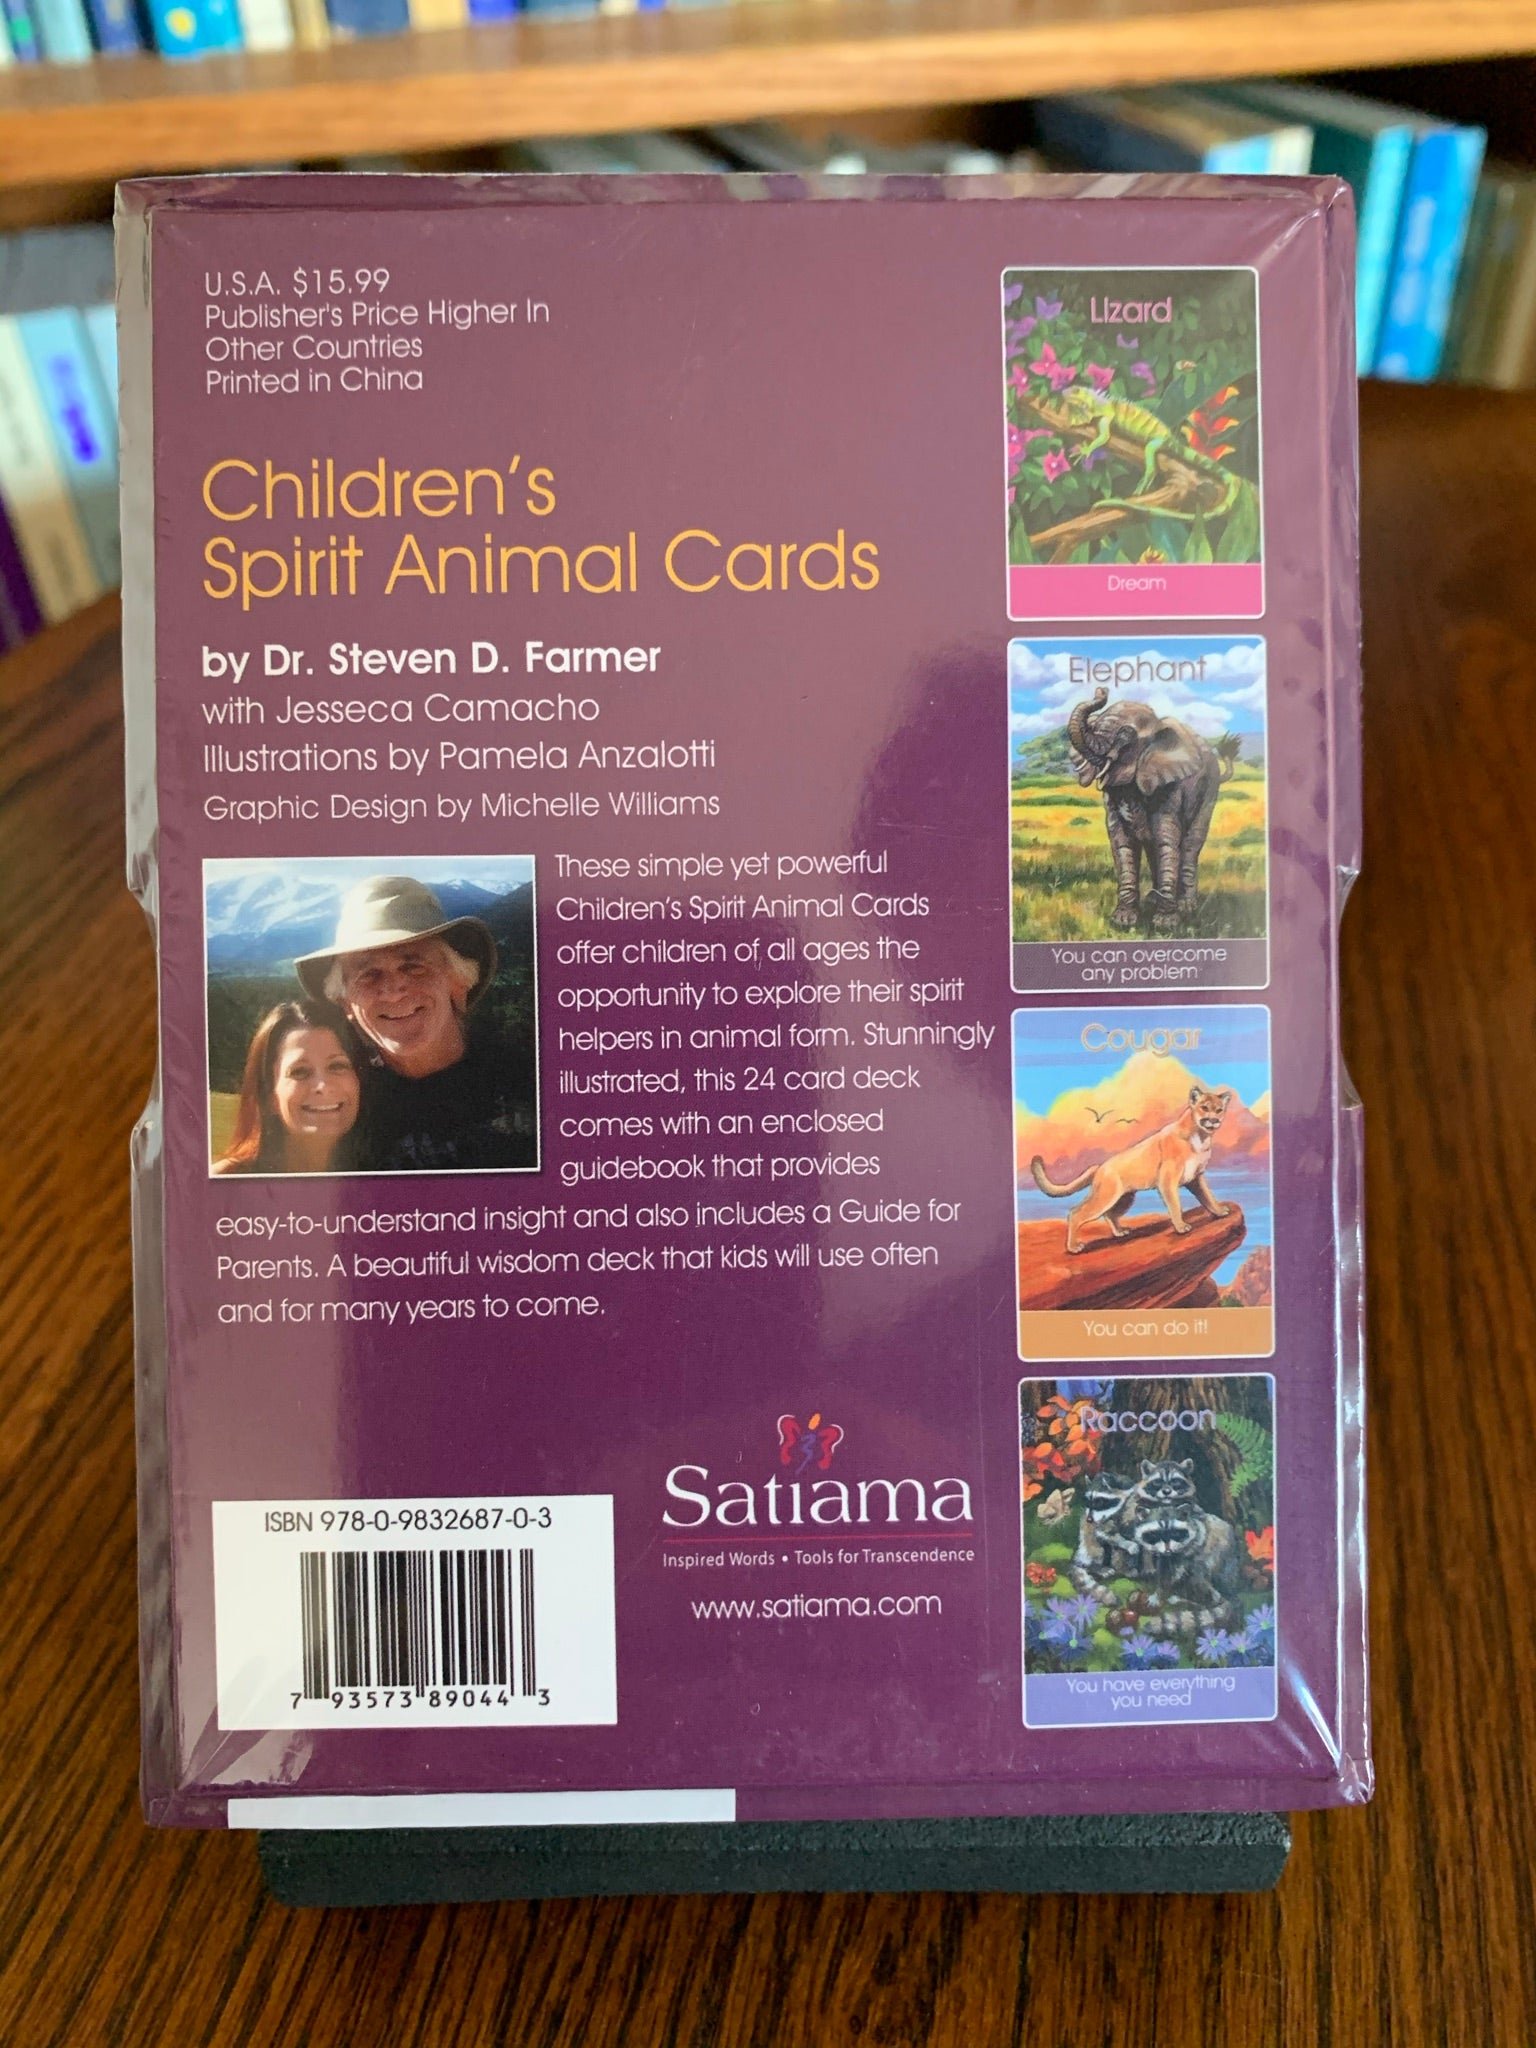 Photo of box back. Children's Spirit Animal Cards, with their colorful and inspiring illustrations give children the chance to choose cards and gain insights without the complexities of adult oracle cards. It also opens children up to the idea of spirit animals and the powerful messages they bring with simple words or phrases and artwork that they will love. Set consists of 24 oracle cards, guidebook (with guidance for parents) and a box for storage. Cost is $15.99.